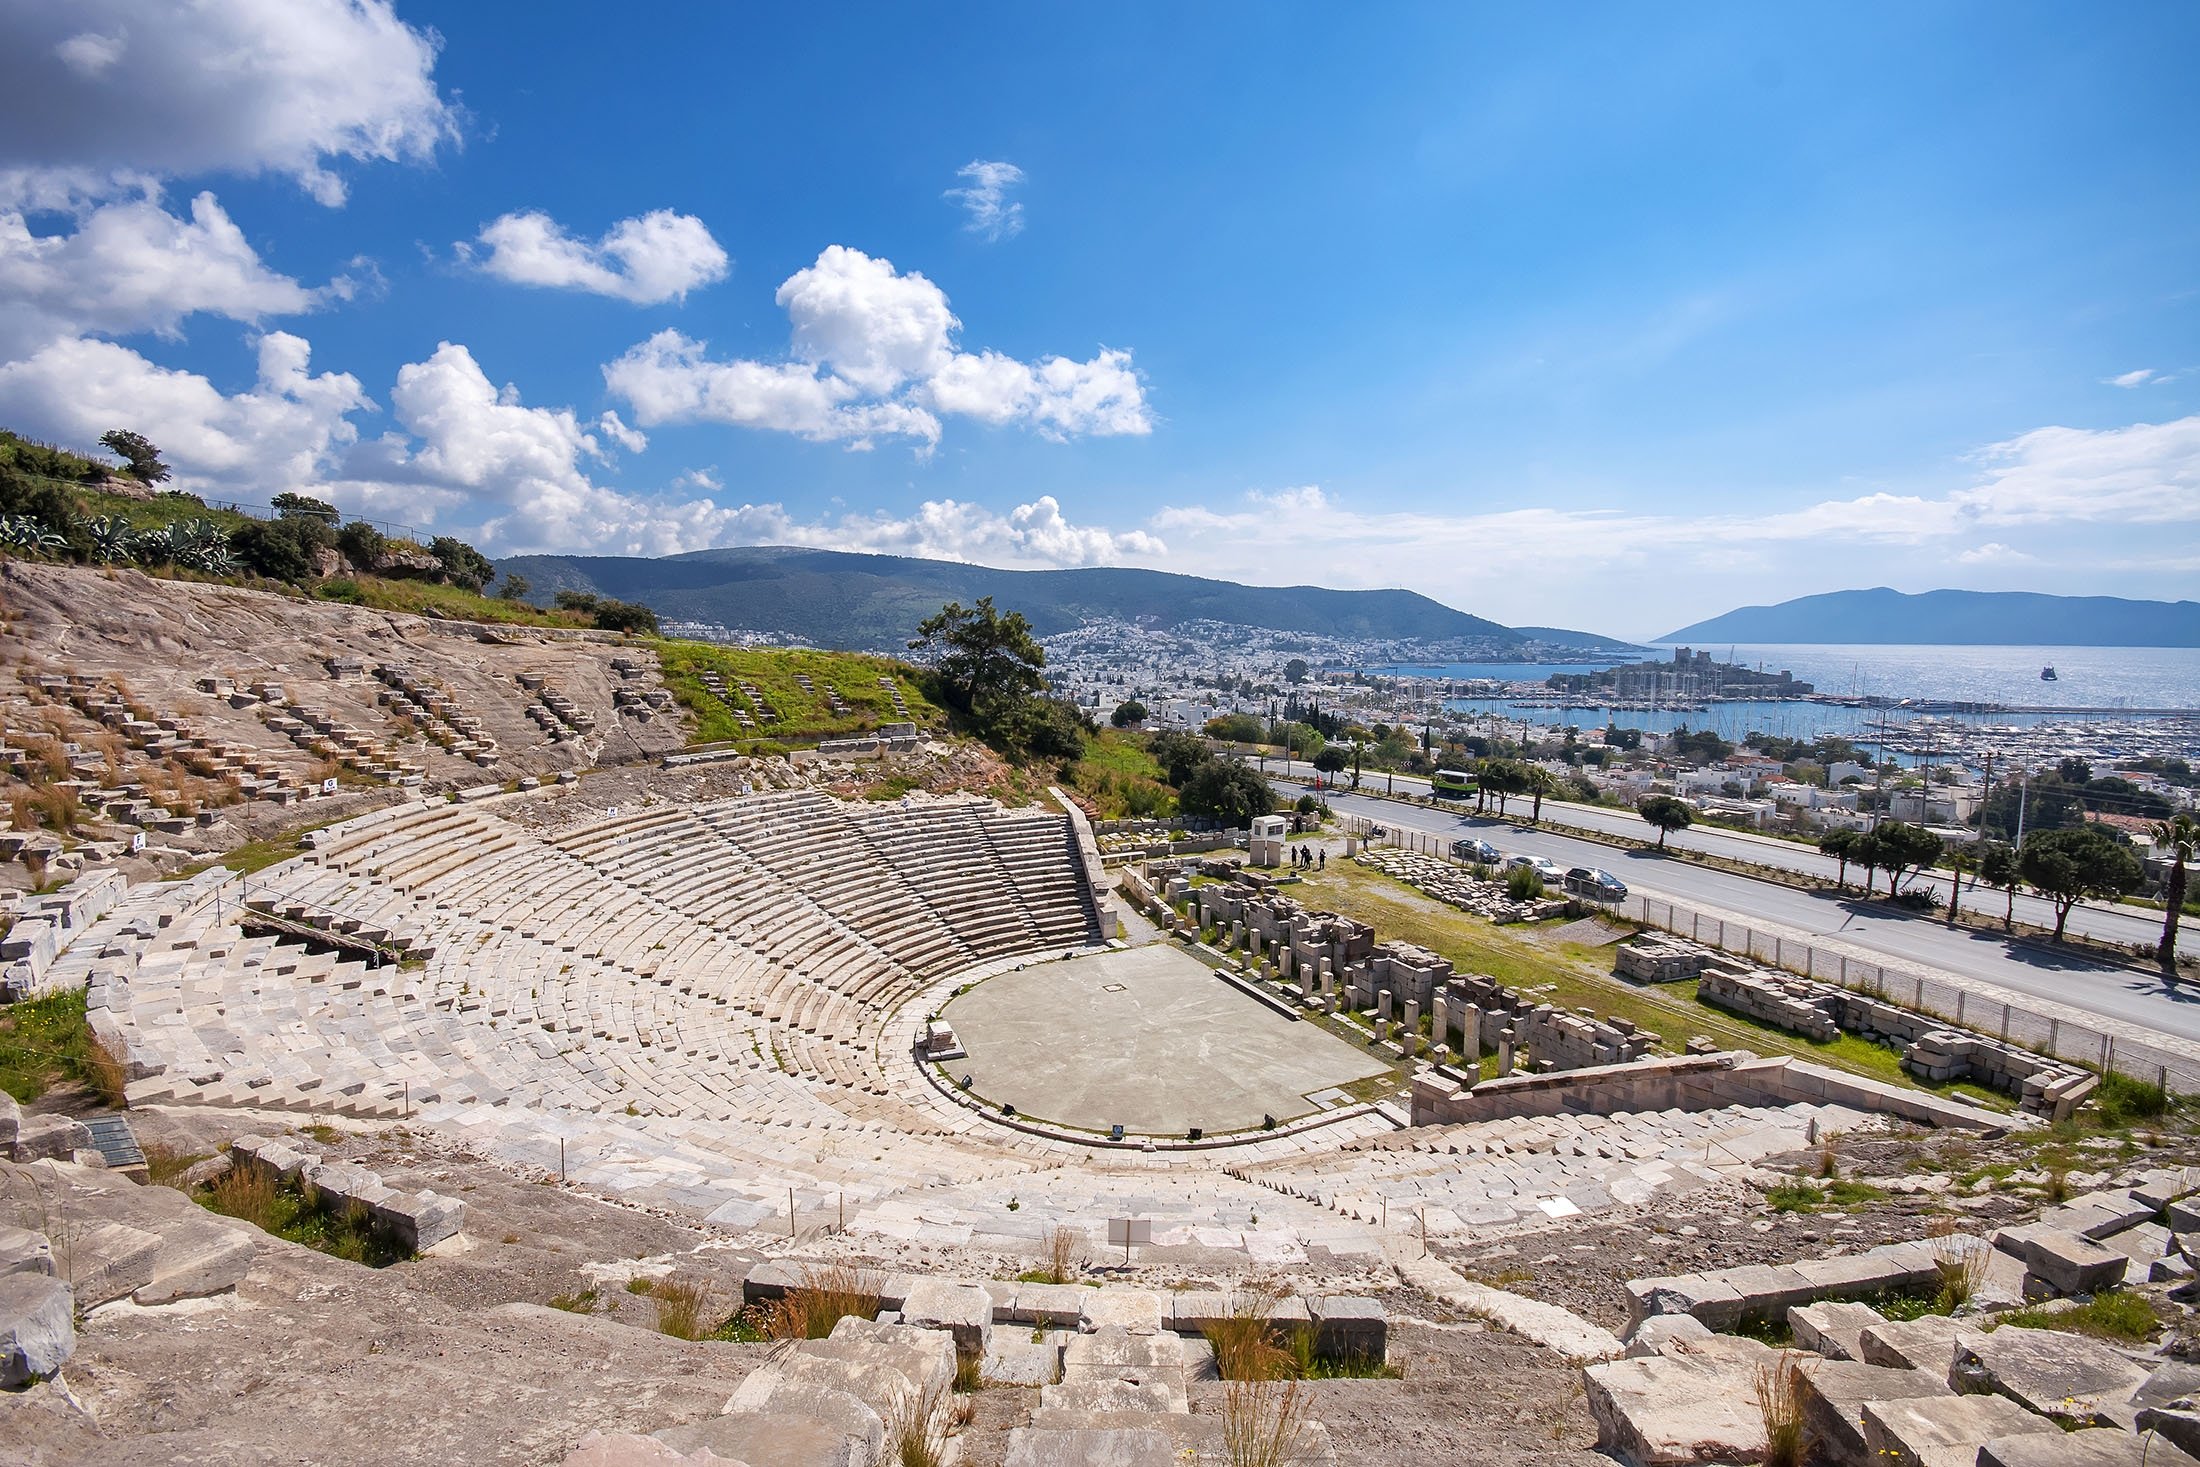 The Greco-Roman antique theater otherwise known as the Theater at Halicarnassus, dates back to the fourth century and overlooks the Bodrum bay and castle.  (Shutterstock Photo)